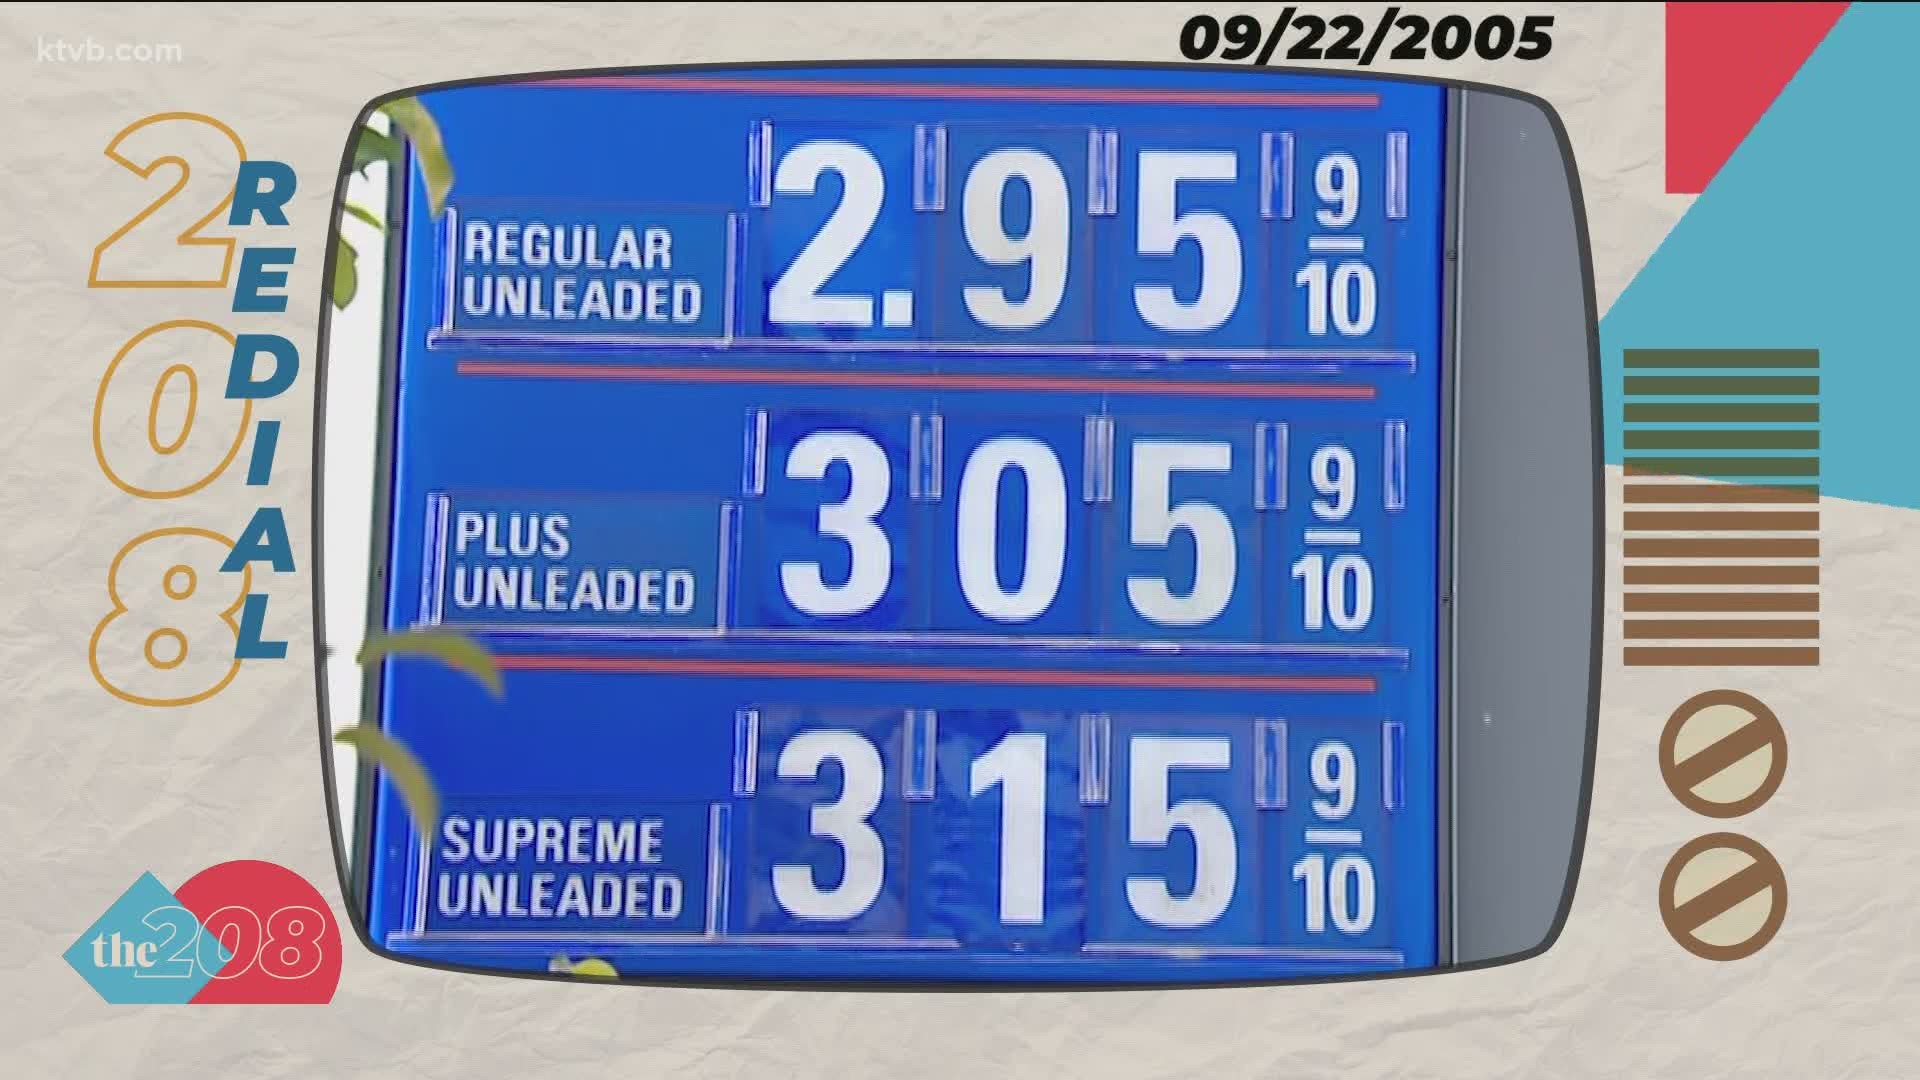 On Sept. 22, 2005, KTVB's Adam Atchison told the story of how the loss of old and gas production in the gulf caused higher prices at the pump in Idaho.